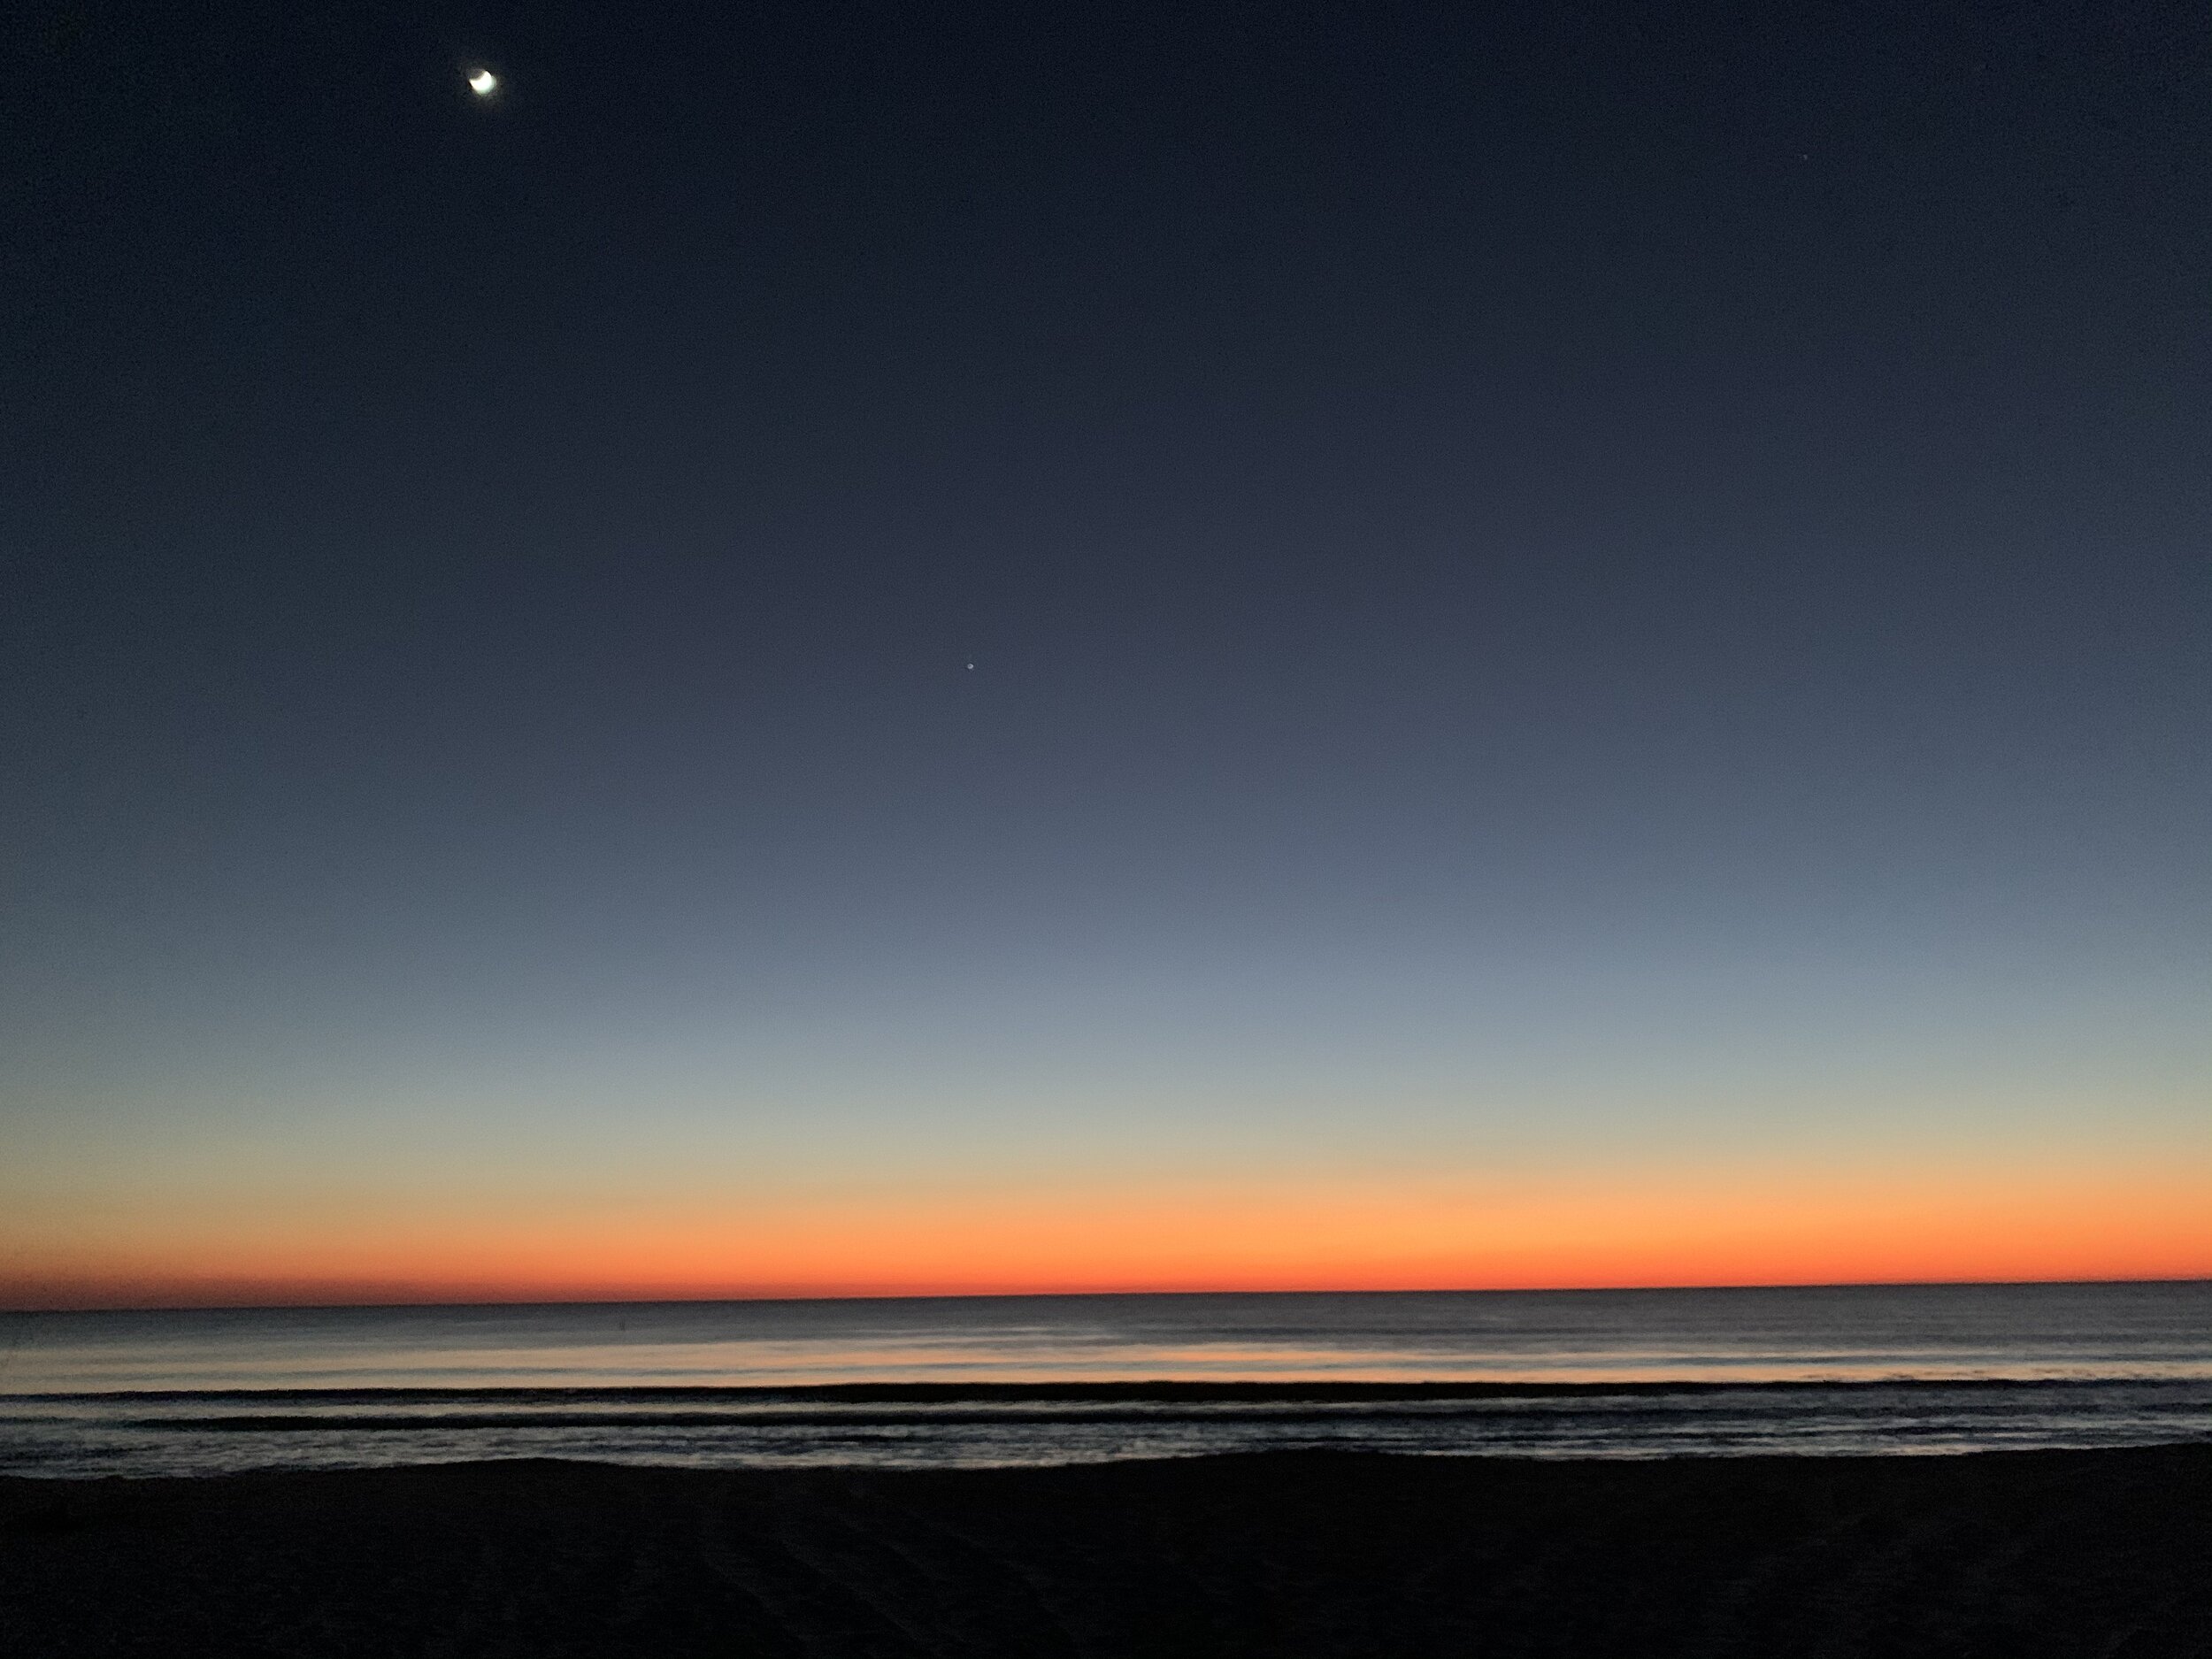 Gulf of Mexico.  Dec 18th, as the Great Conjunction begins.  Jupiter is barely visible as the sun has set. The moon in the very upper left.